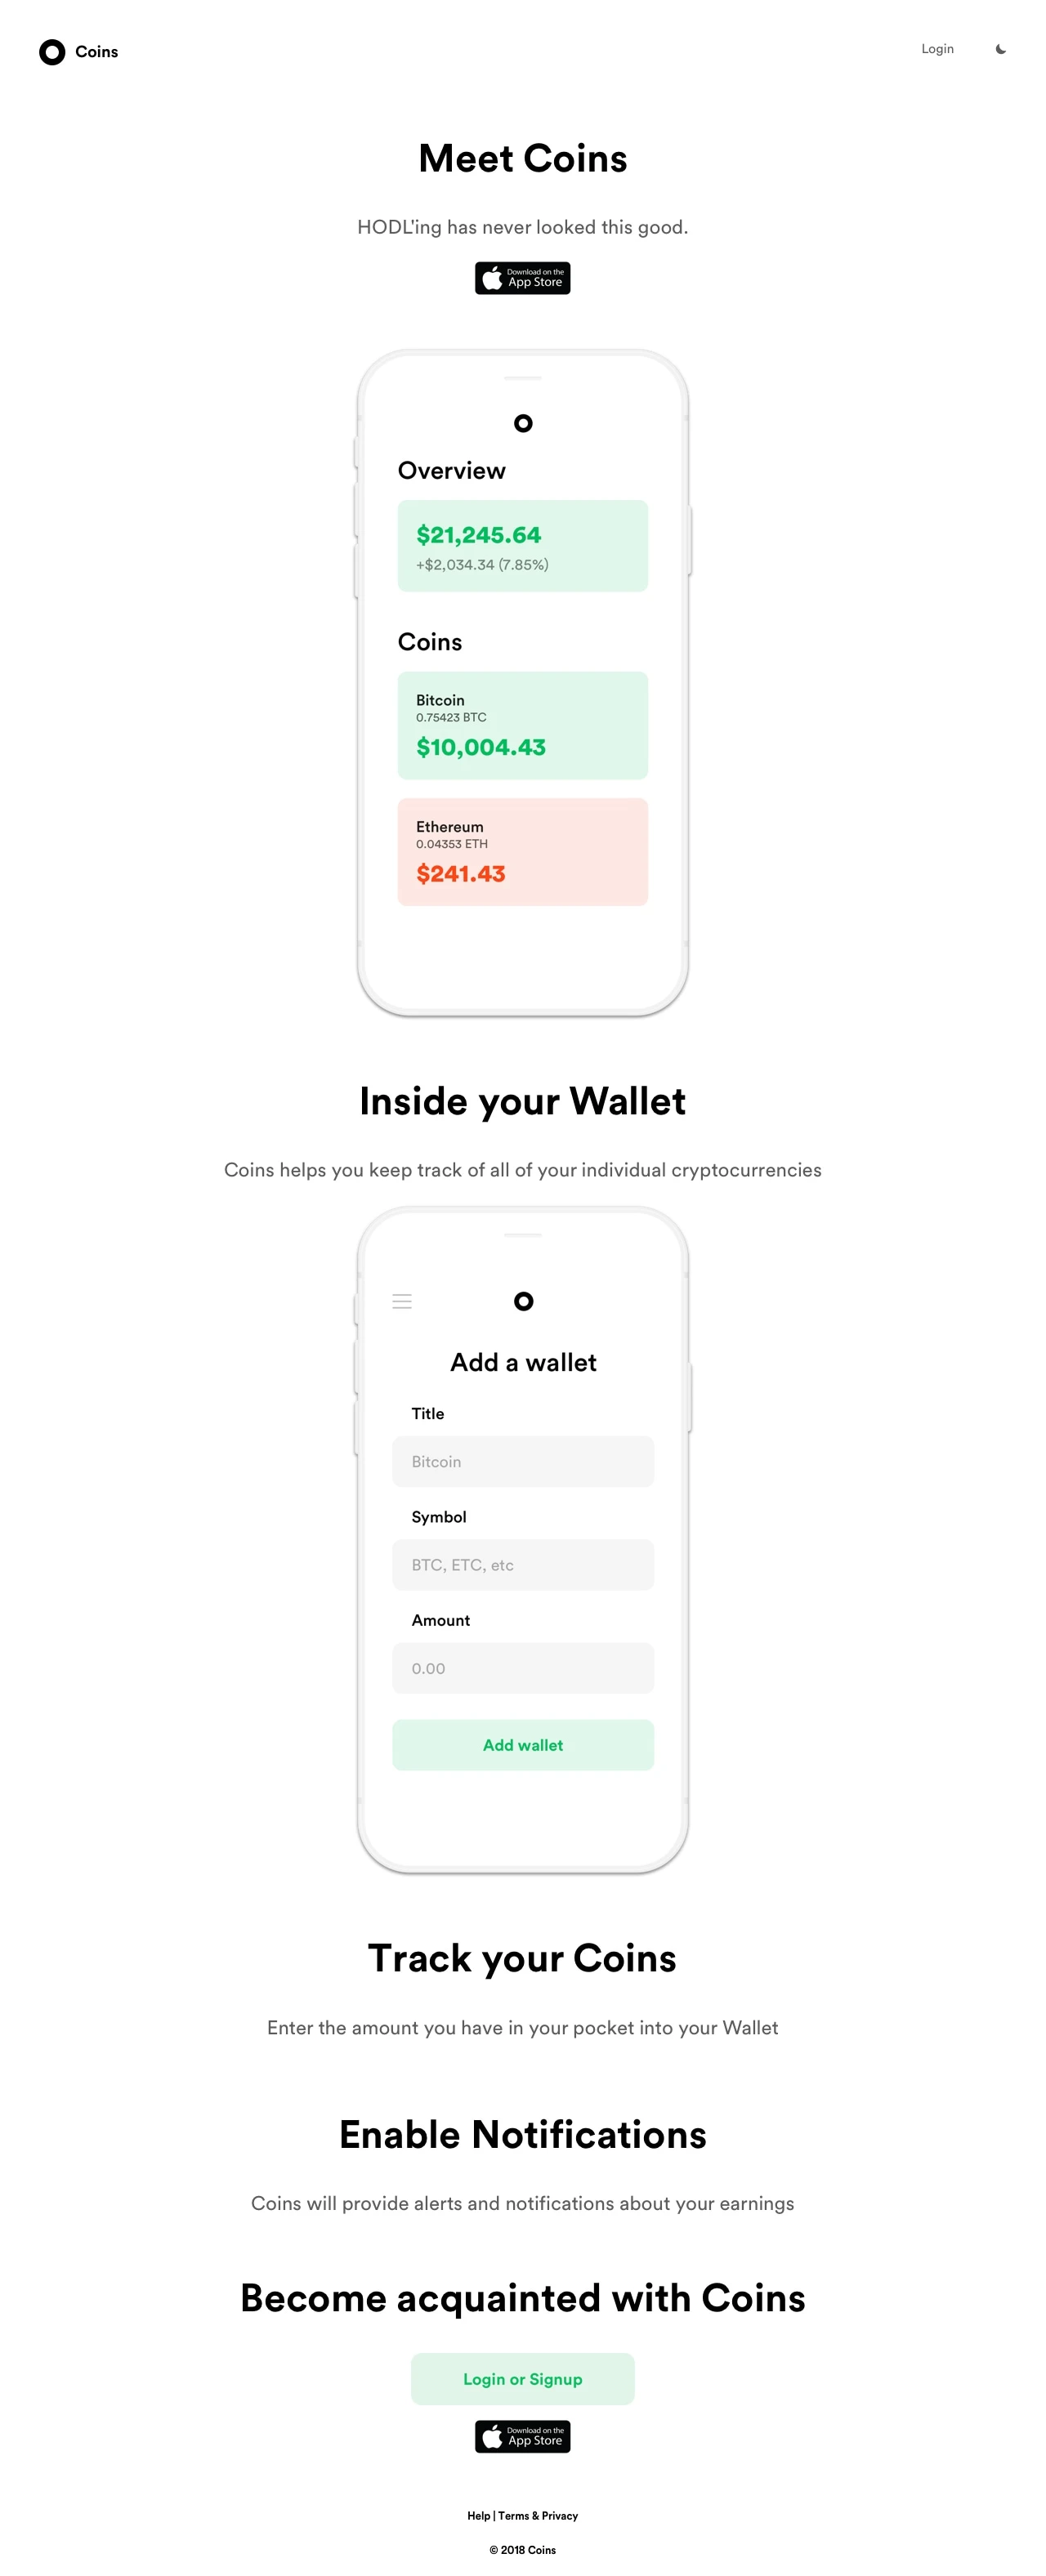 Coins Landing Page Example: Coins helps you keep track of all of your individual cryptocurrencies.